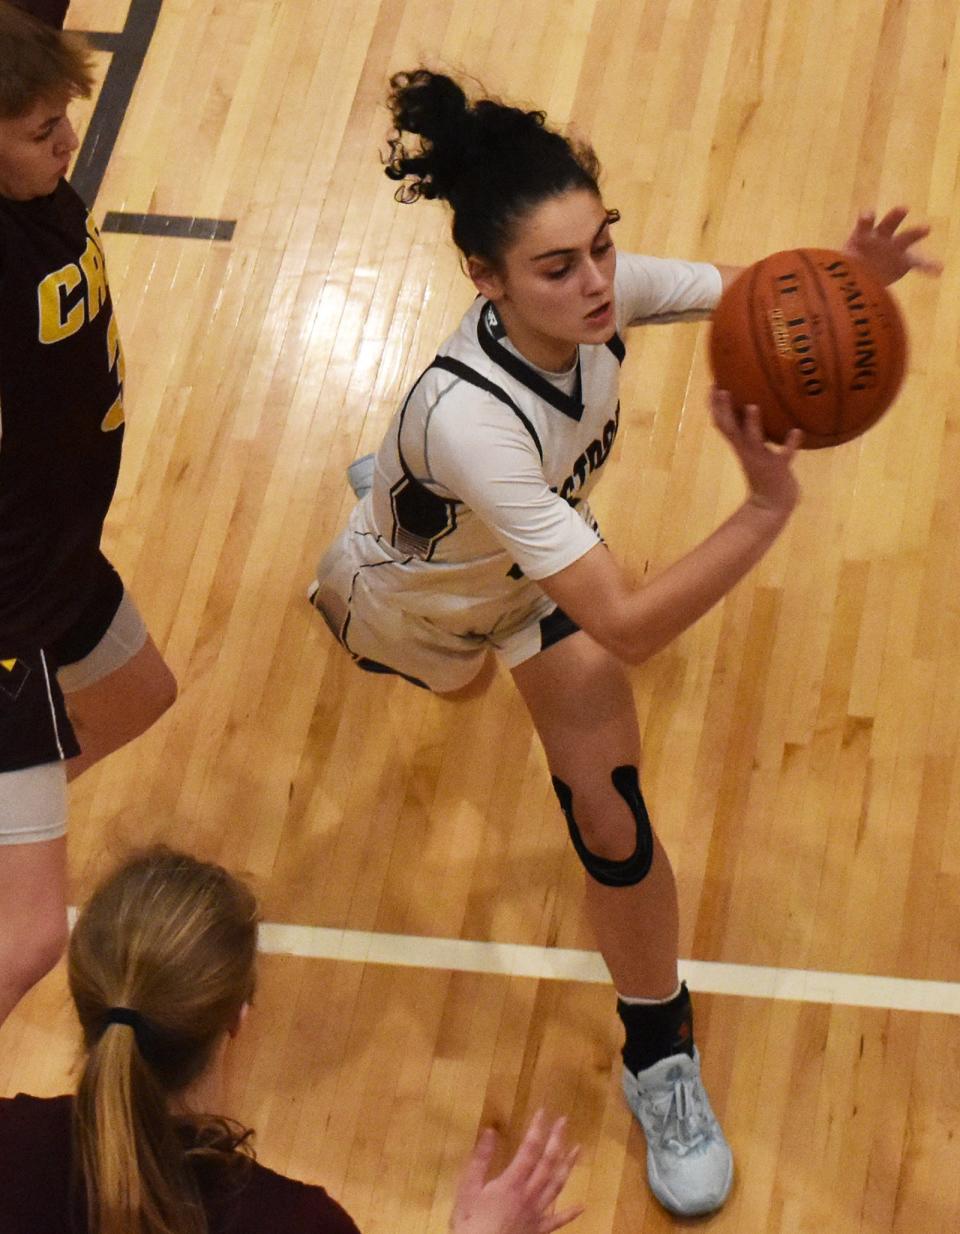 Westport's Korynne Holden passes the ball to a teammate in this Feb. 13 file photo.